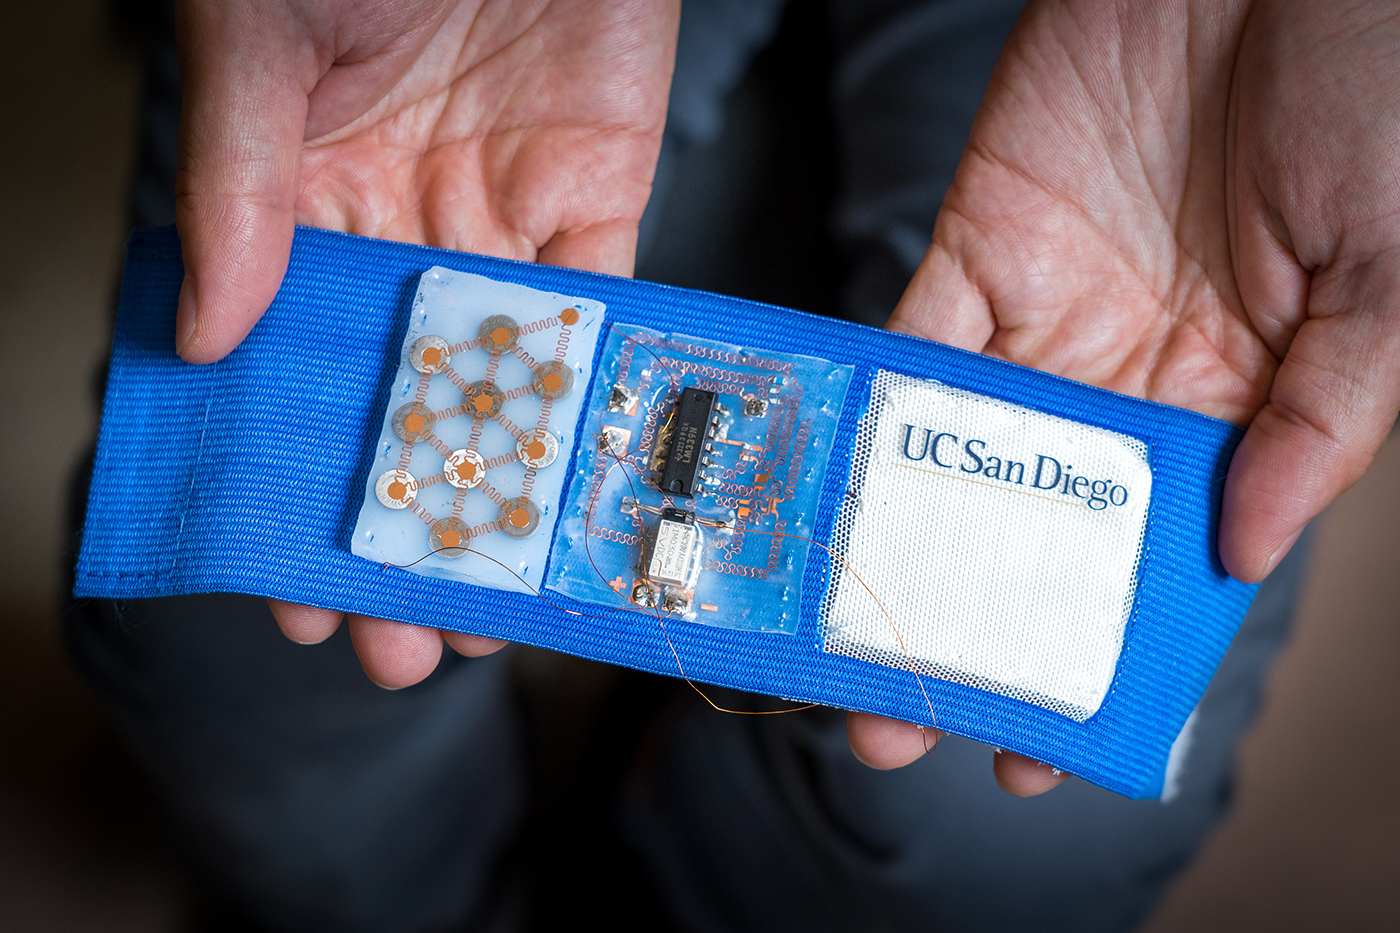 Armband embedded with flexible battery pack (left), stretchable circuit (center), and cooling/heating patch (right). Credit: UCSD.edu